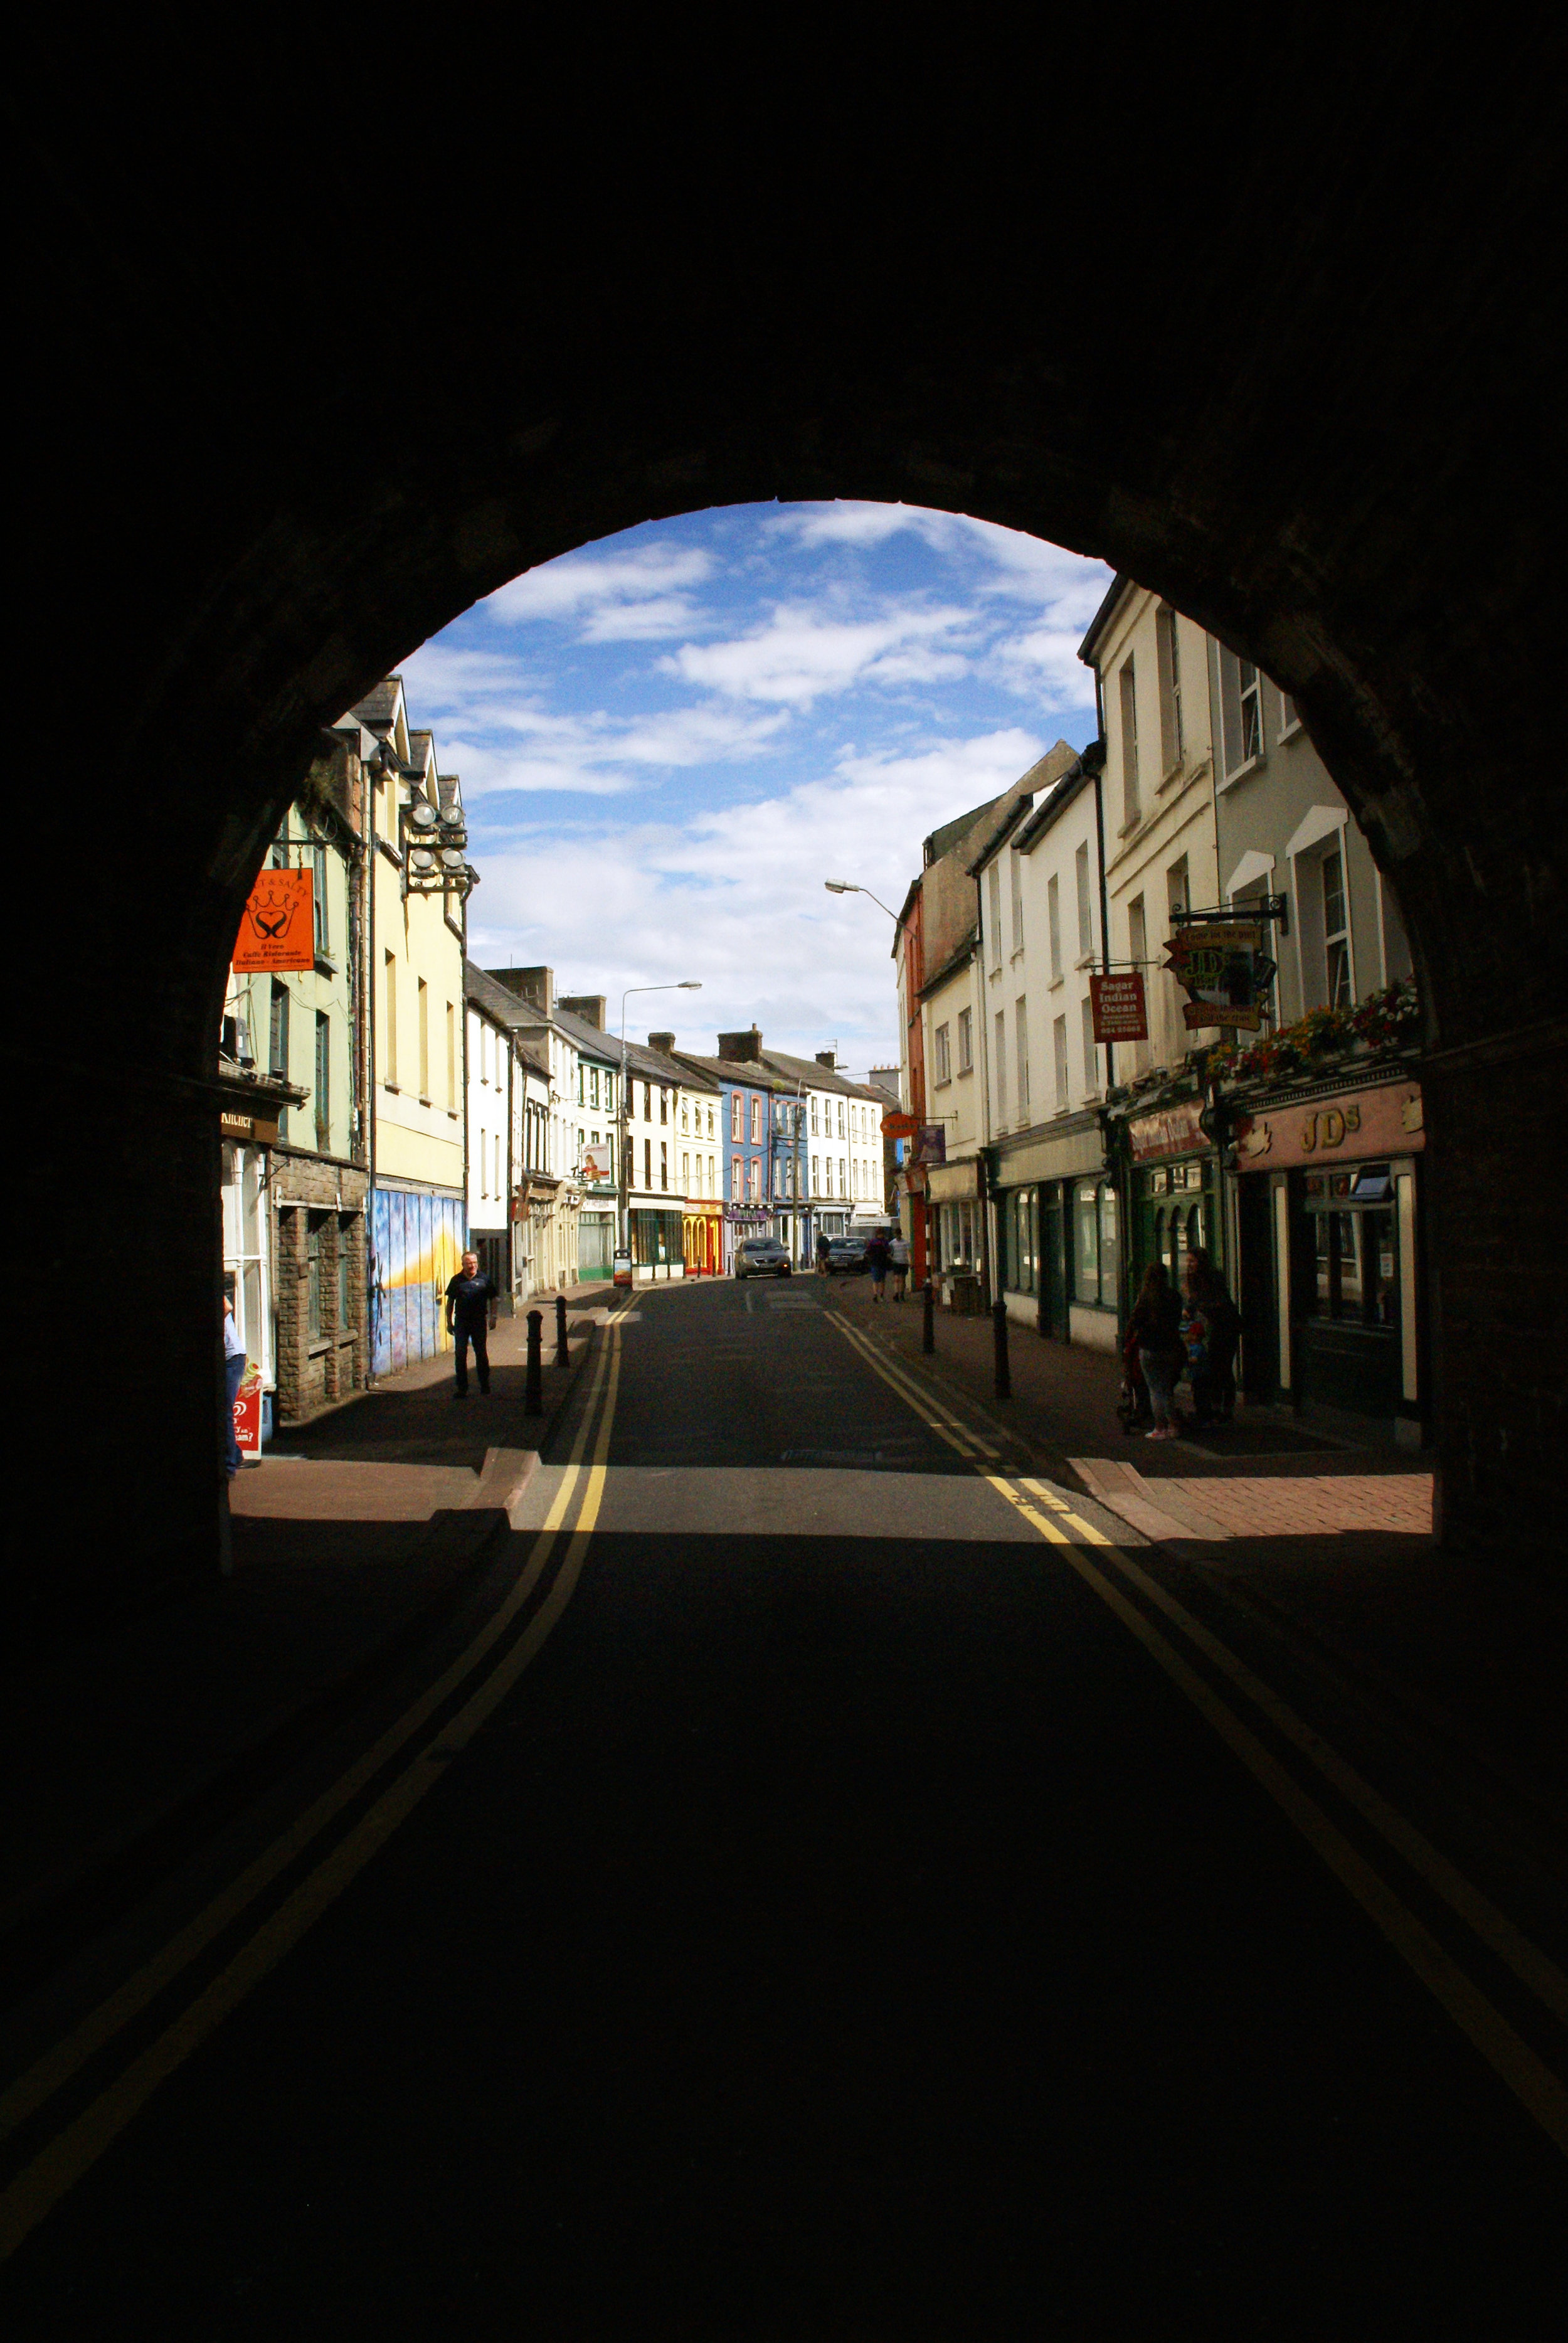  We stopped in a quaint seaside town called Youghal. It was a quick stop so I tried to get as many photos as I could before hopping back on the bus. I stumbled upon this picturesque tunnel that framed all the colorful buildings and blue sky on the ot